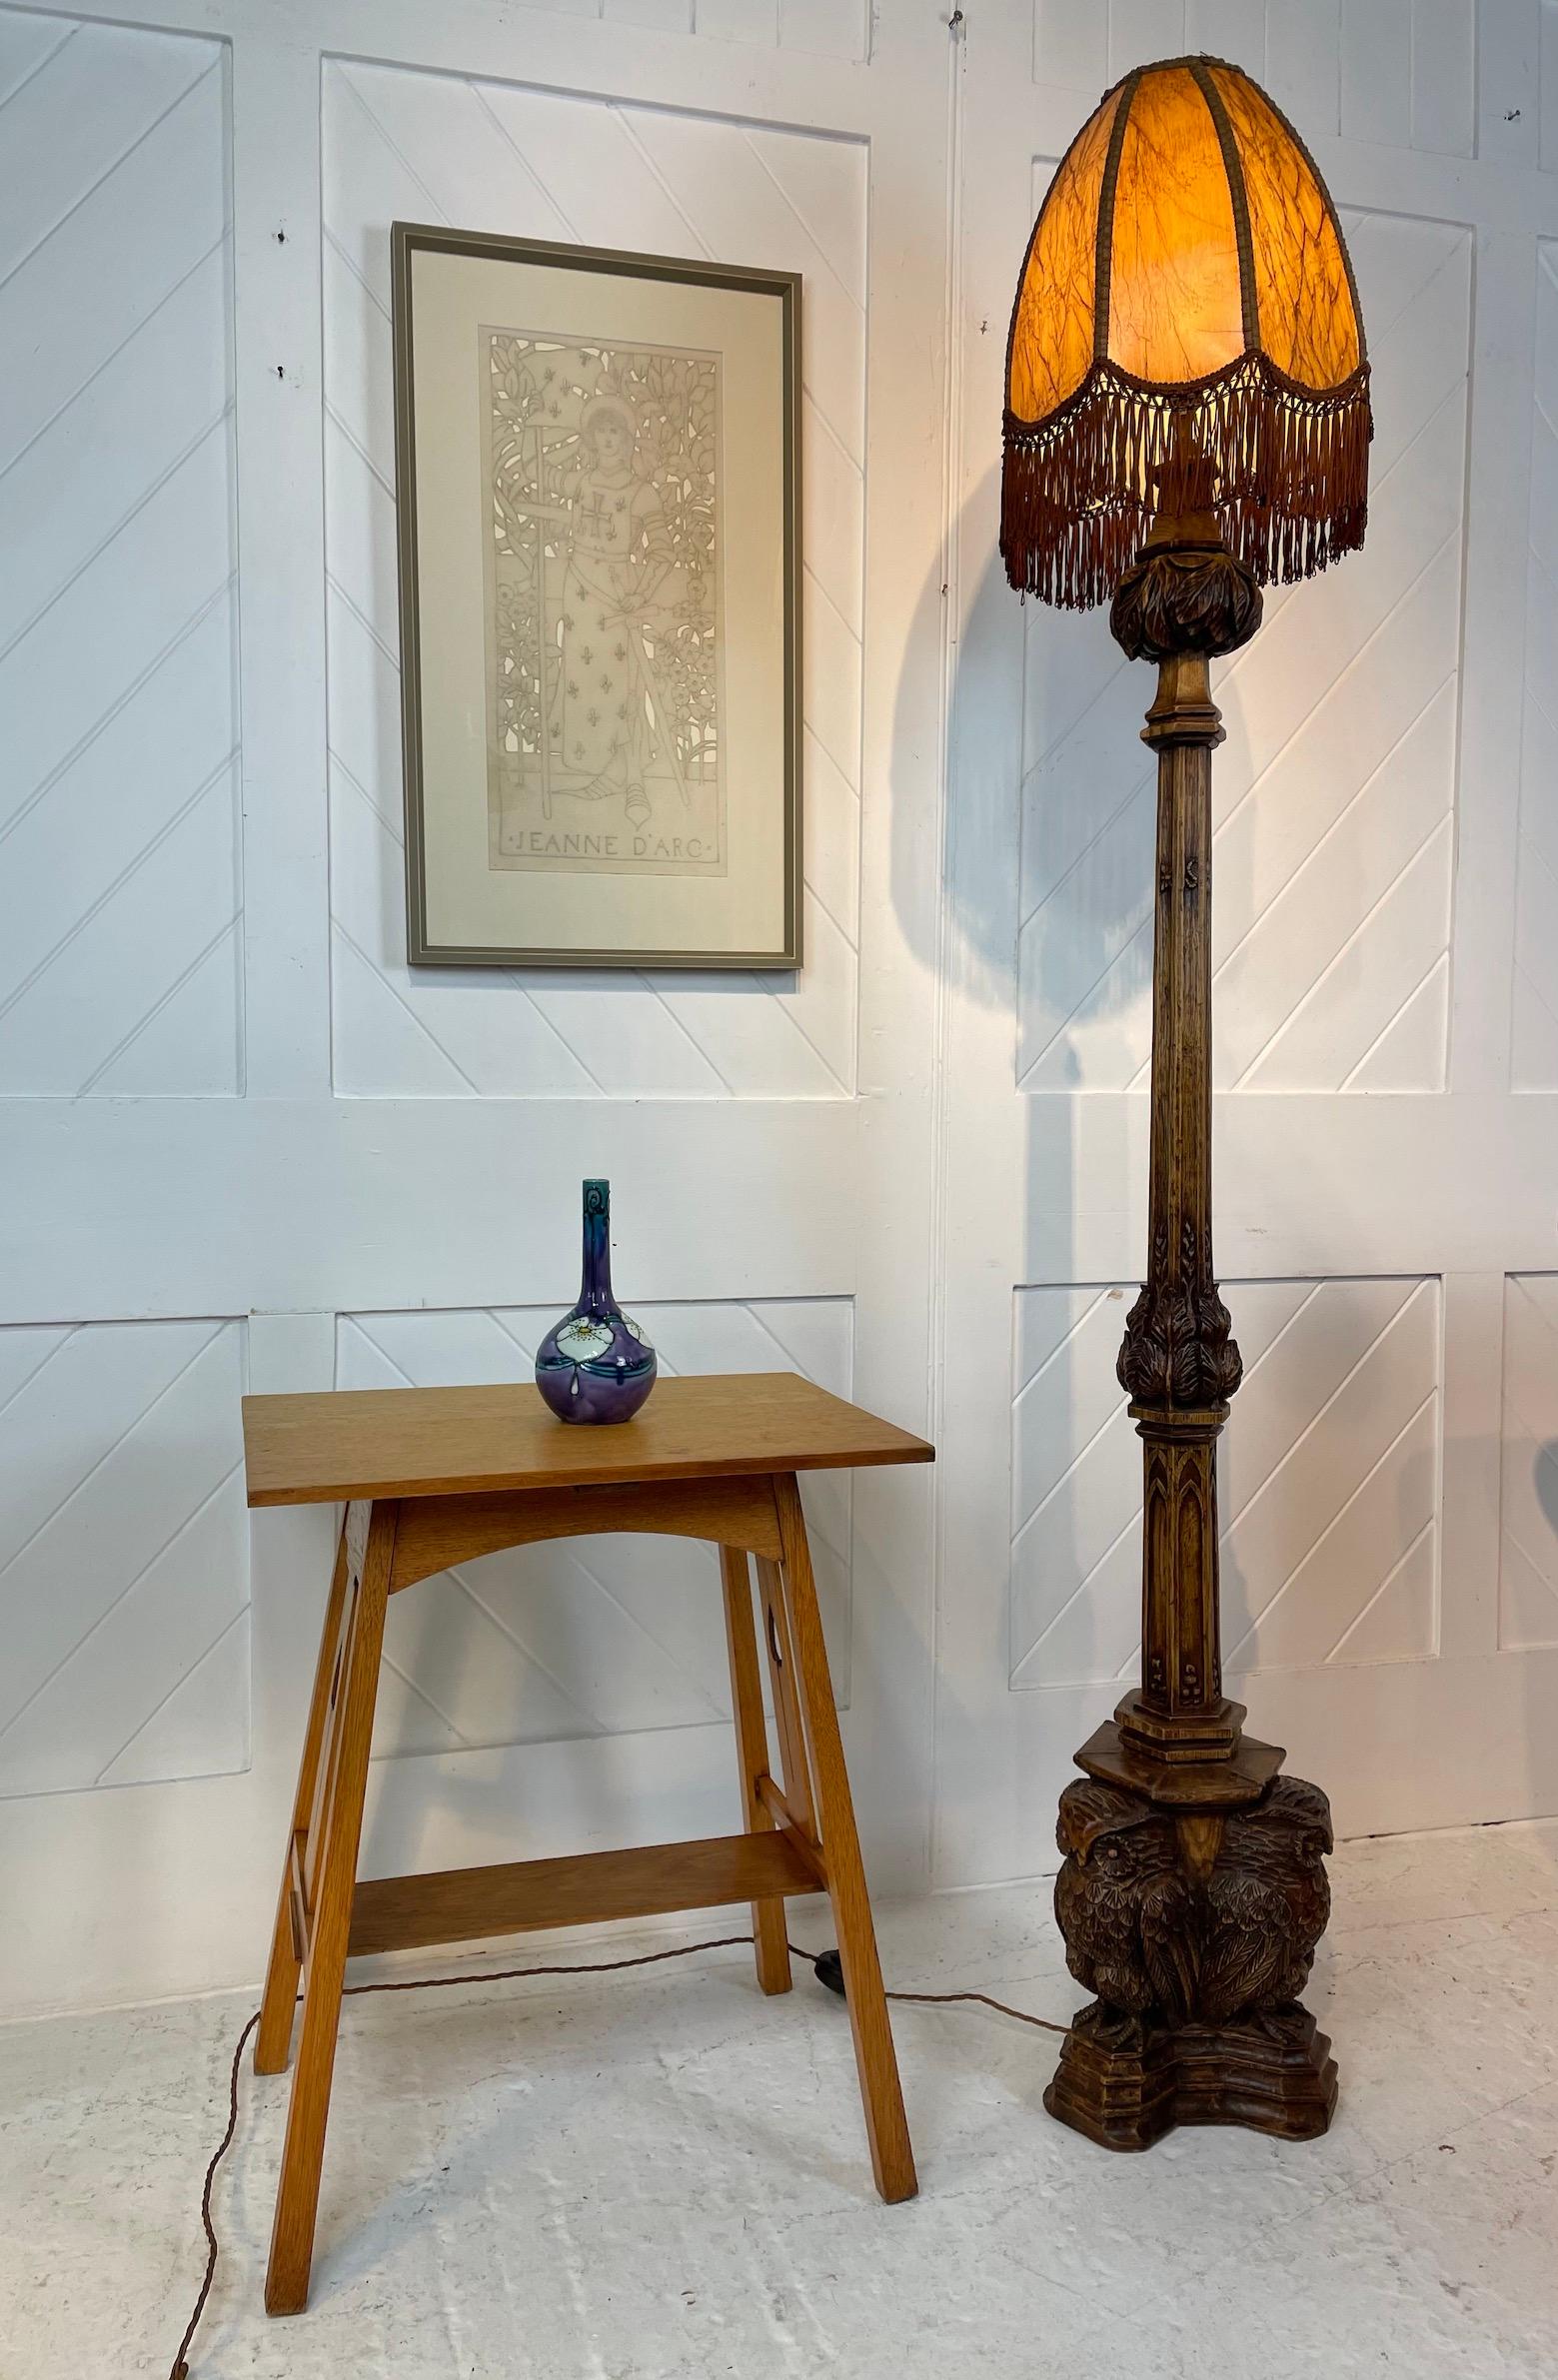 Fabulous carved oak standard lamp

The carving depicts stylised leaf design to the top and is further replicated on the stand

The column has carved insects around it

The base depicts 3 carved large owls standing on a plinth

It is in the manner of